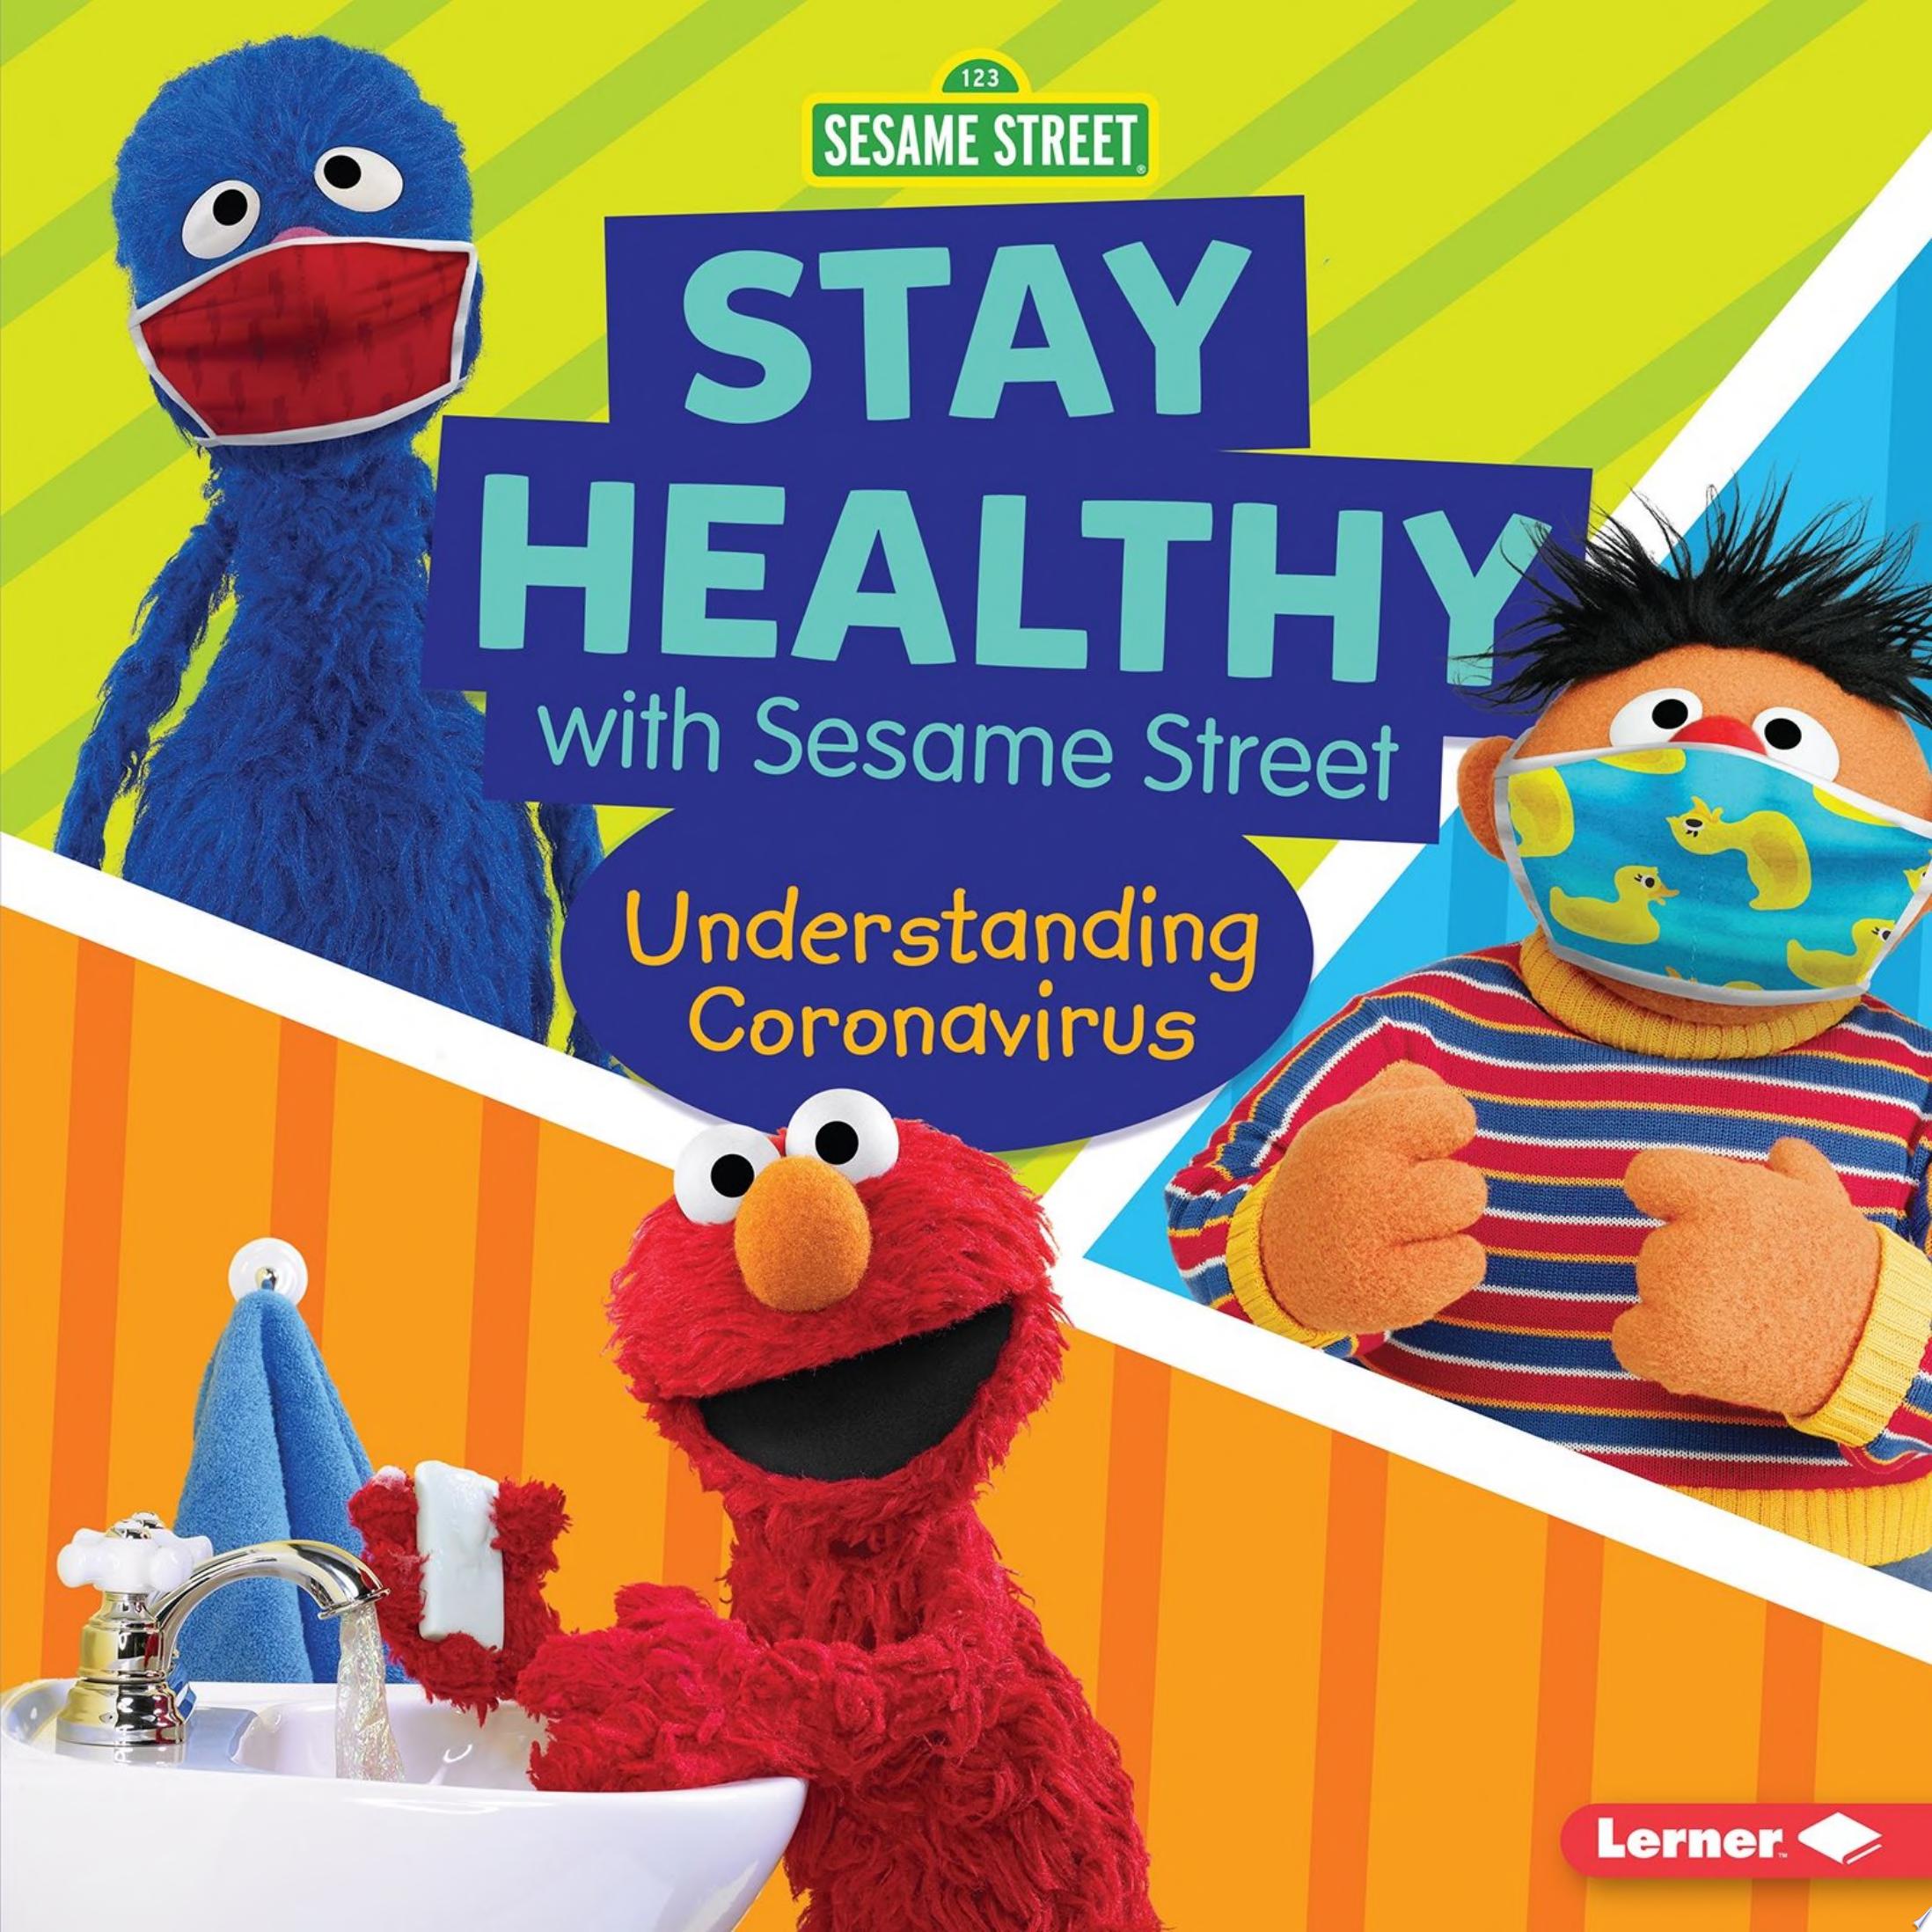 Image for "Stay Healthy with Sesame Street ®"